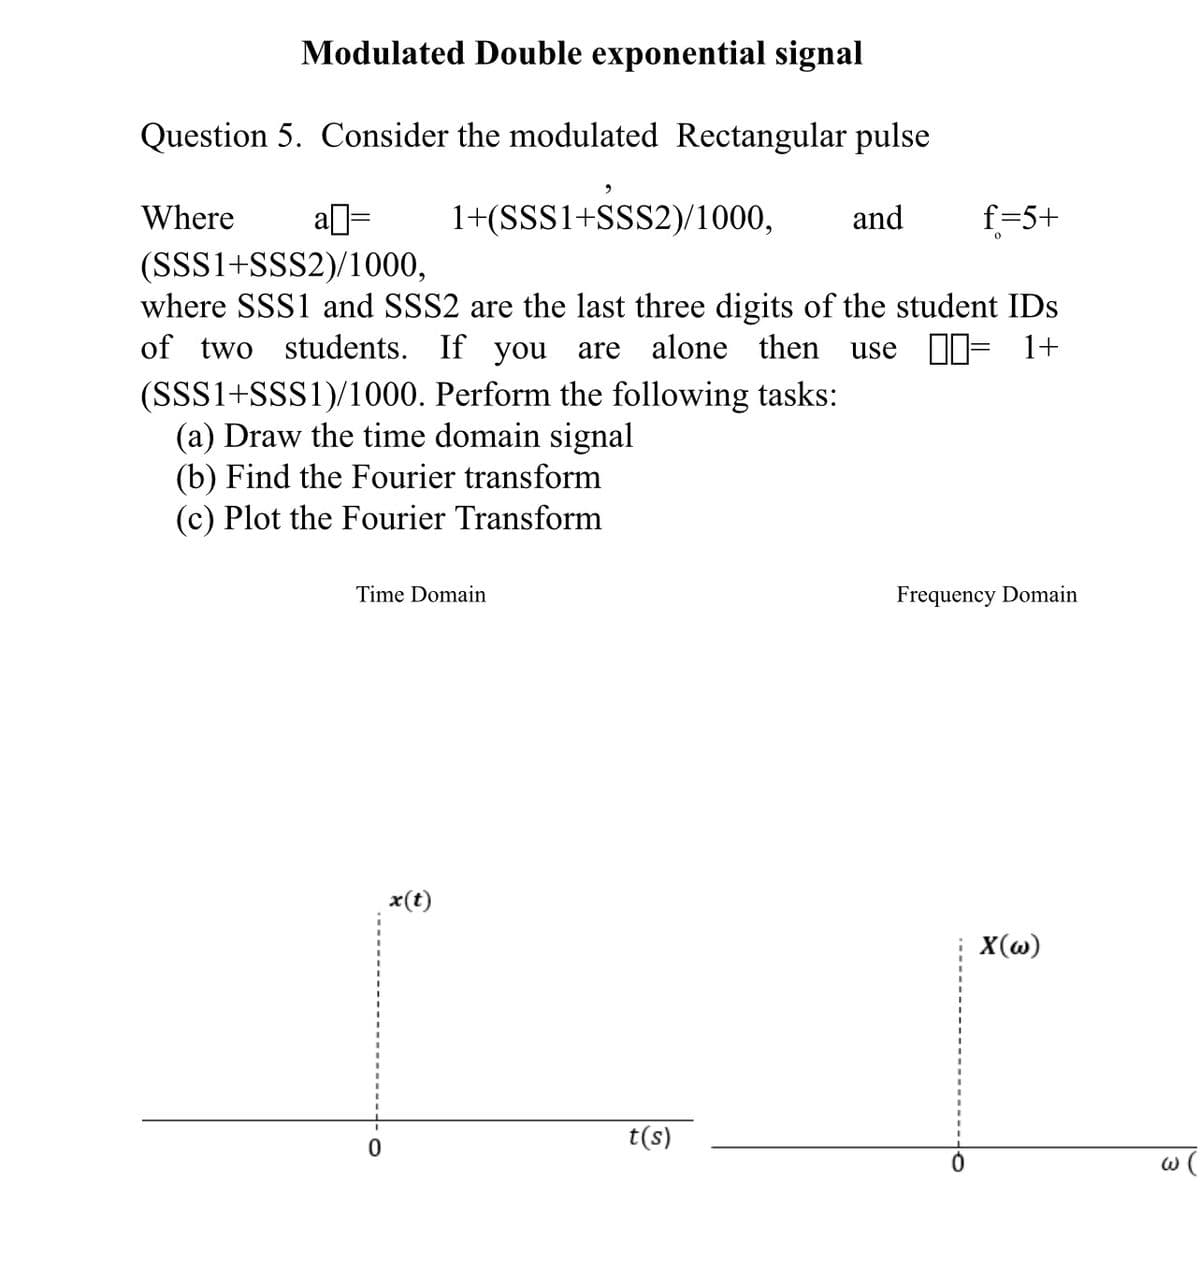 Modulated Double exponential signal
Question 5. Consider the modulated Rectangular pulse
a= 1+(SSS1+SSS2)/1000, and
(SSS1+SSS2)/1000,
where SSS1 and SSS2 are the last three digits of the student IDs
of two students. If you are alone then use = 1+
Where
(SSS1+SSS1)/1000. Perform the following tasks:
(a) Draw the time domain signal
(b) Find the Fourier transform
(c) Plot the Fourier Transform
Time Domain
x(t)
t(s)
f=5+
Frequency Domain
X(w)
w (
3